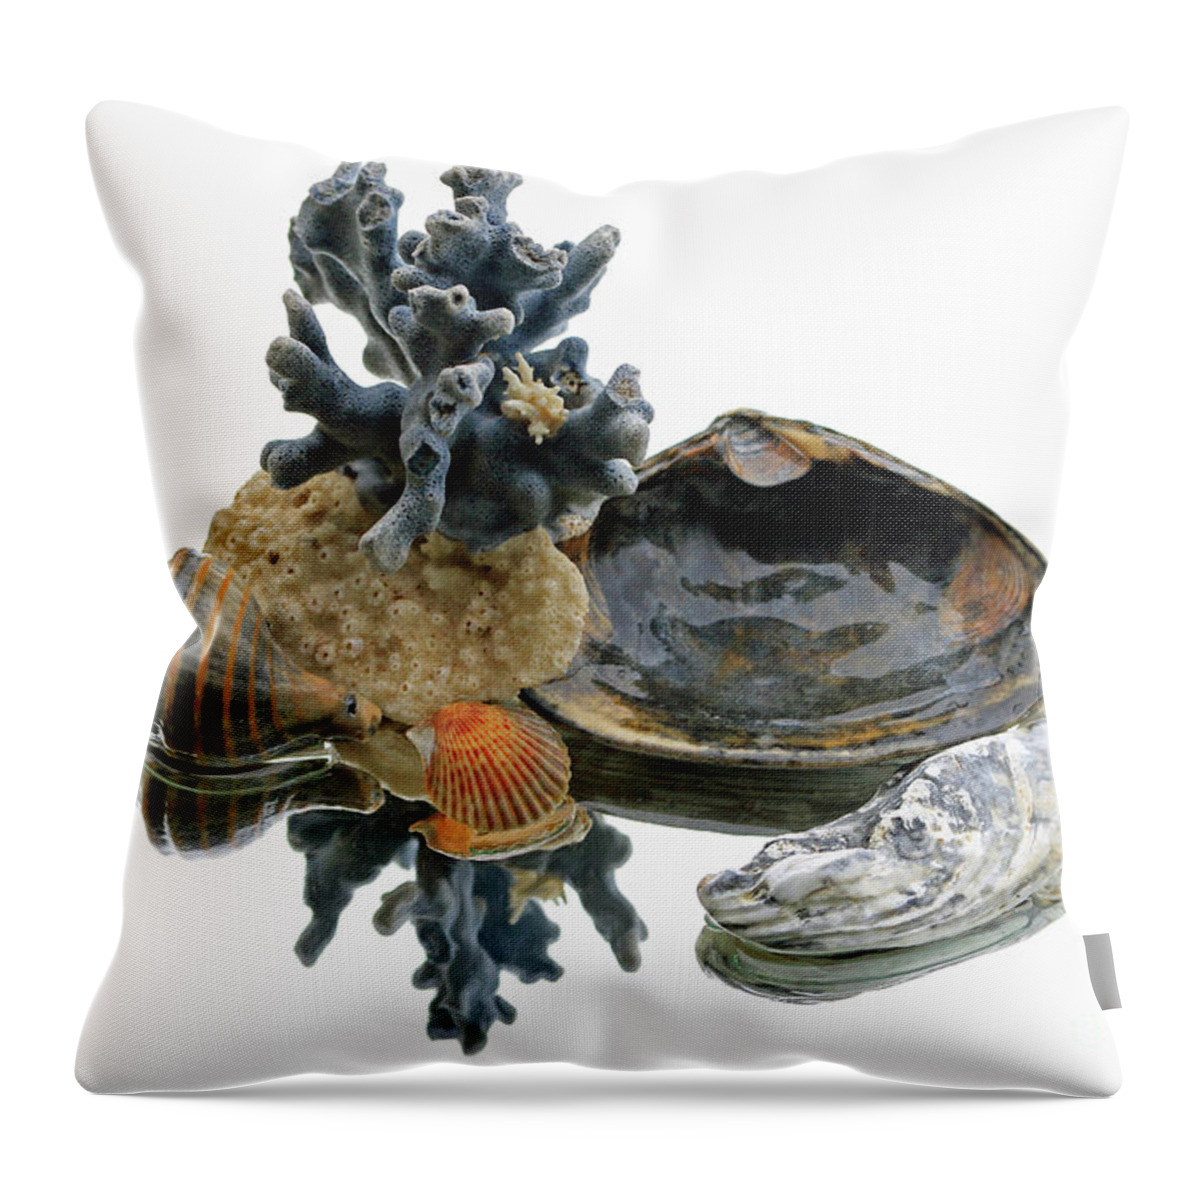 Still Life Throw Pillow featuring the photograph Sea Life Still Life by Mary Haber